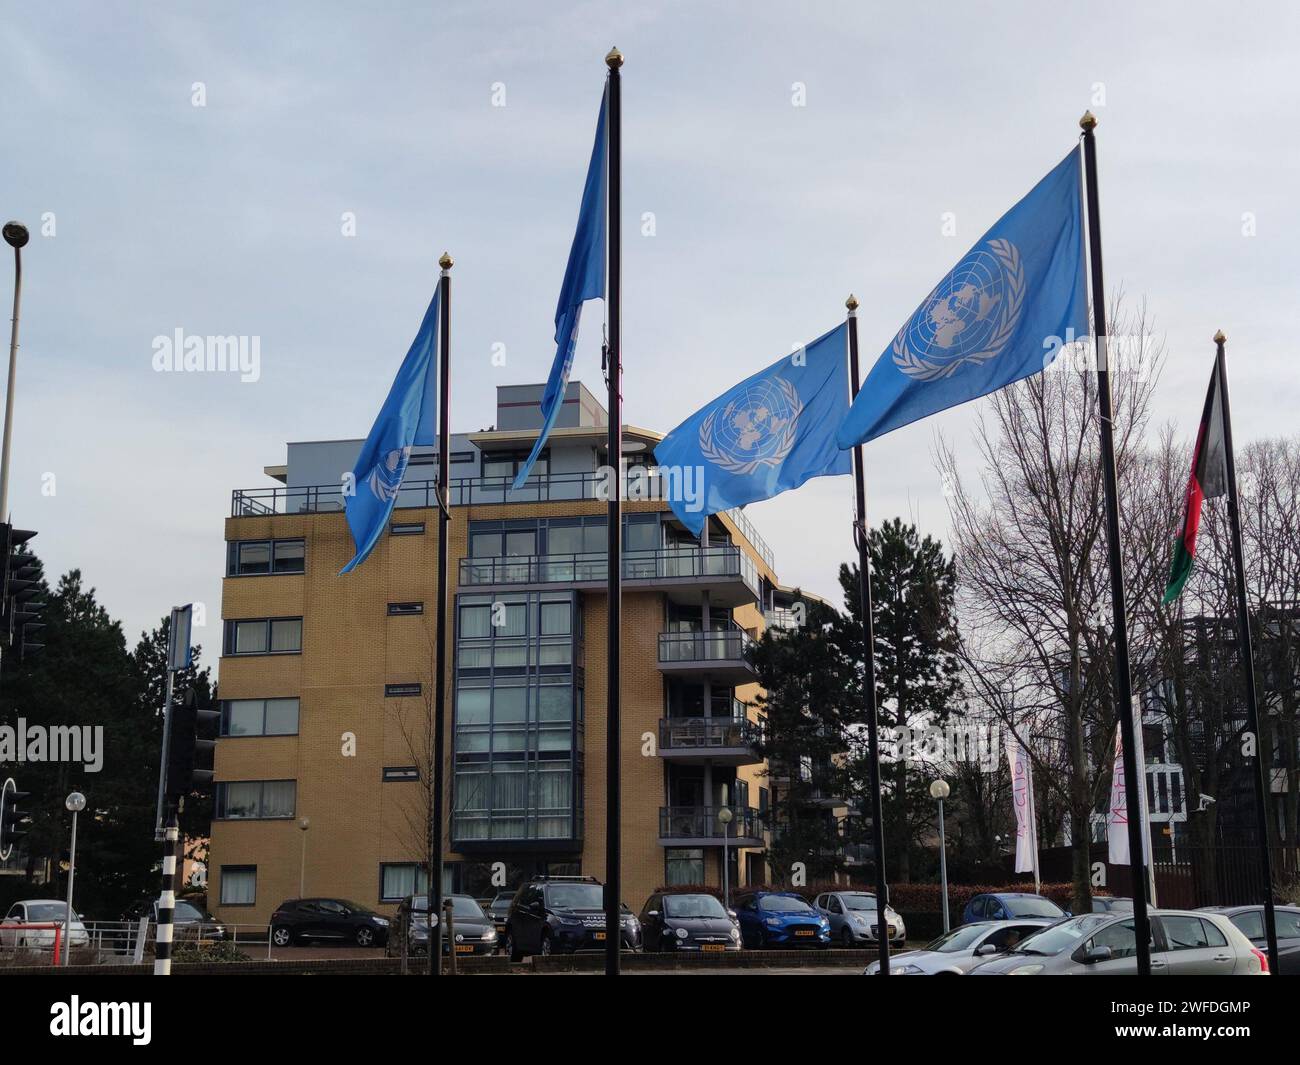 Flags of the United Nations are waving in the wind near the World Forum in the city of The Hague, Netherlands Stock Photo